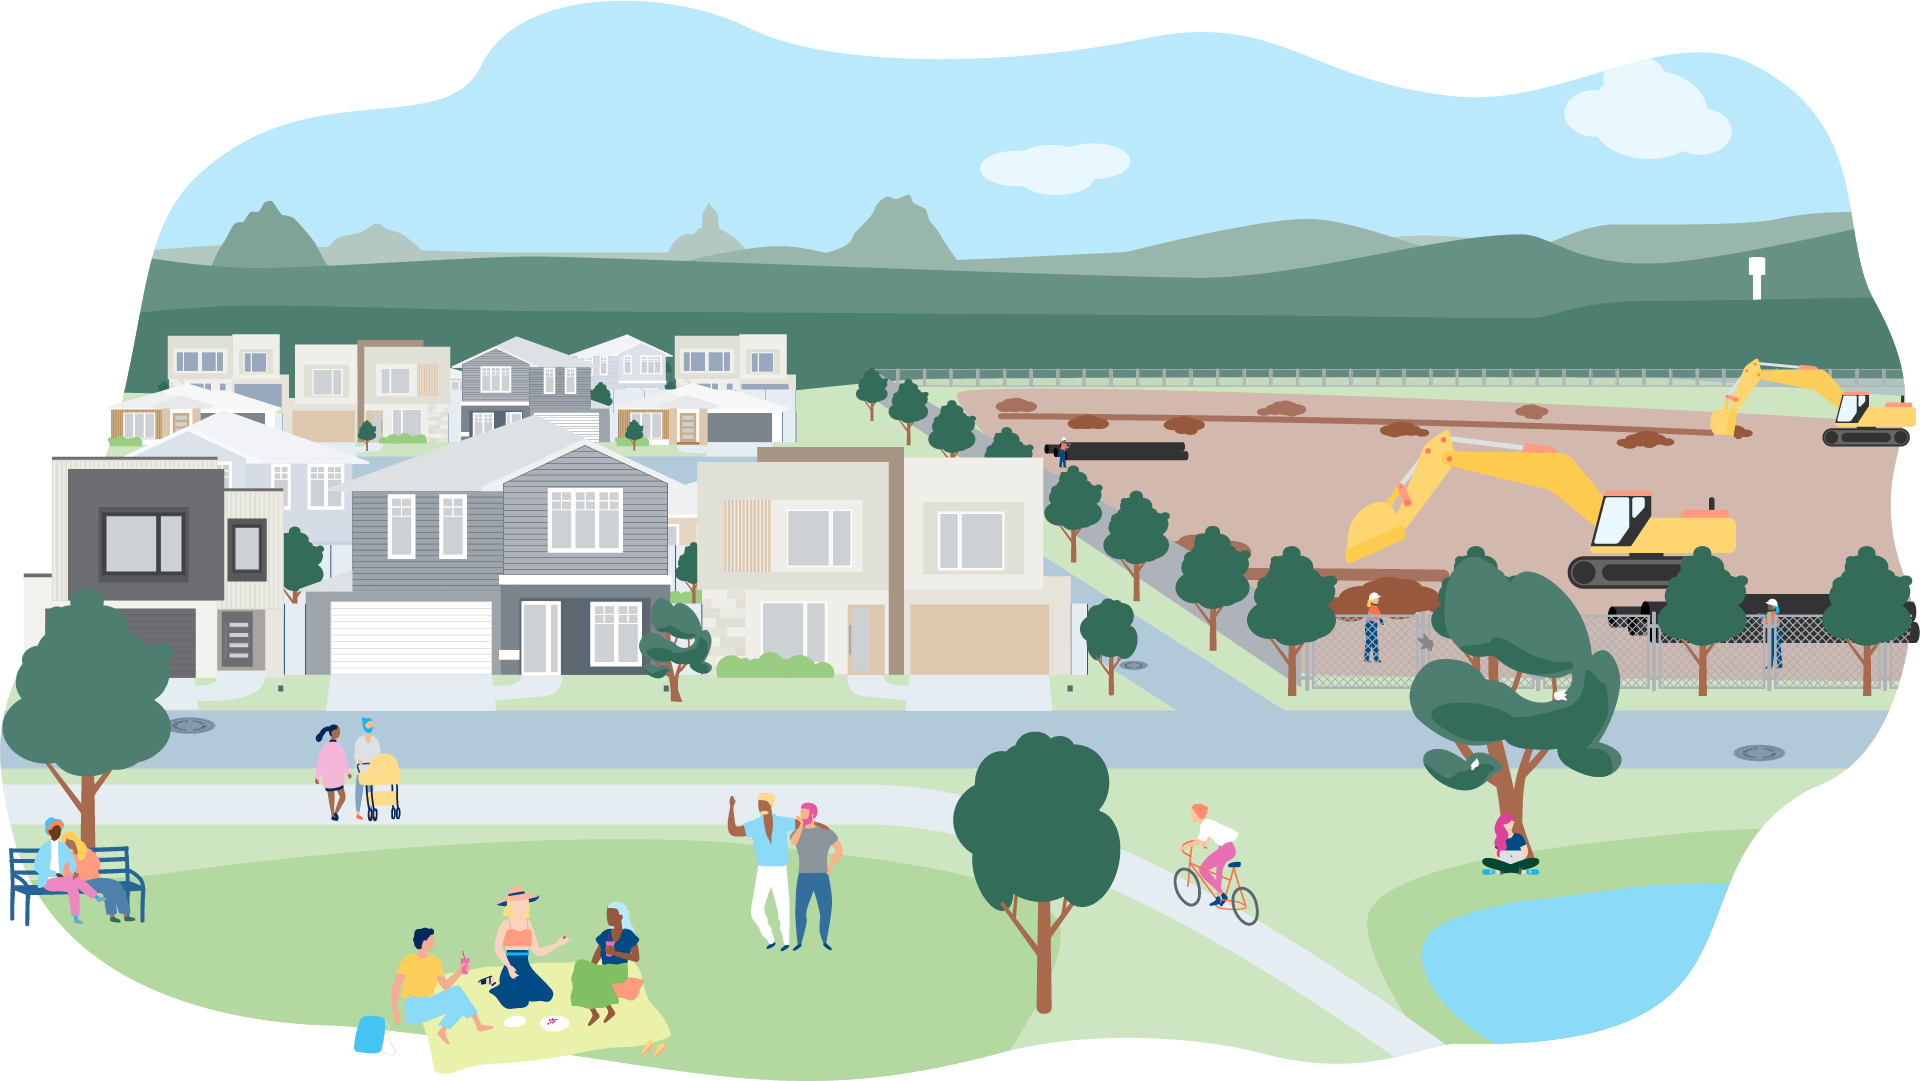 Landscape illustration showing development in a growing community Unitywater service